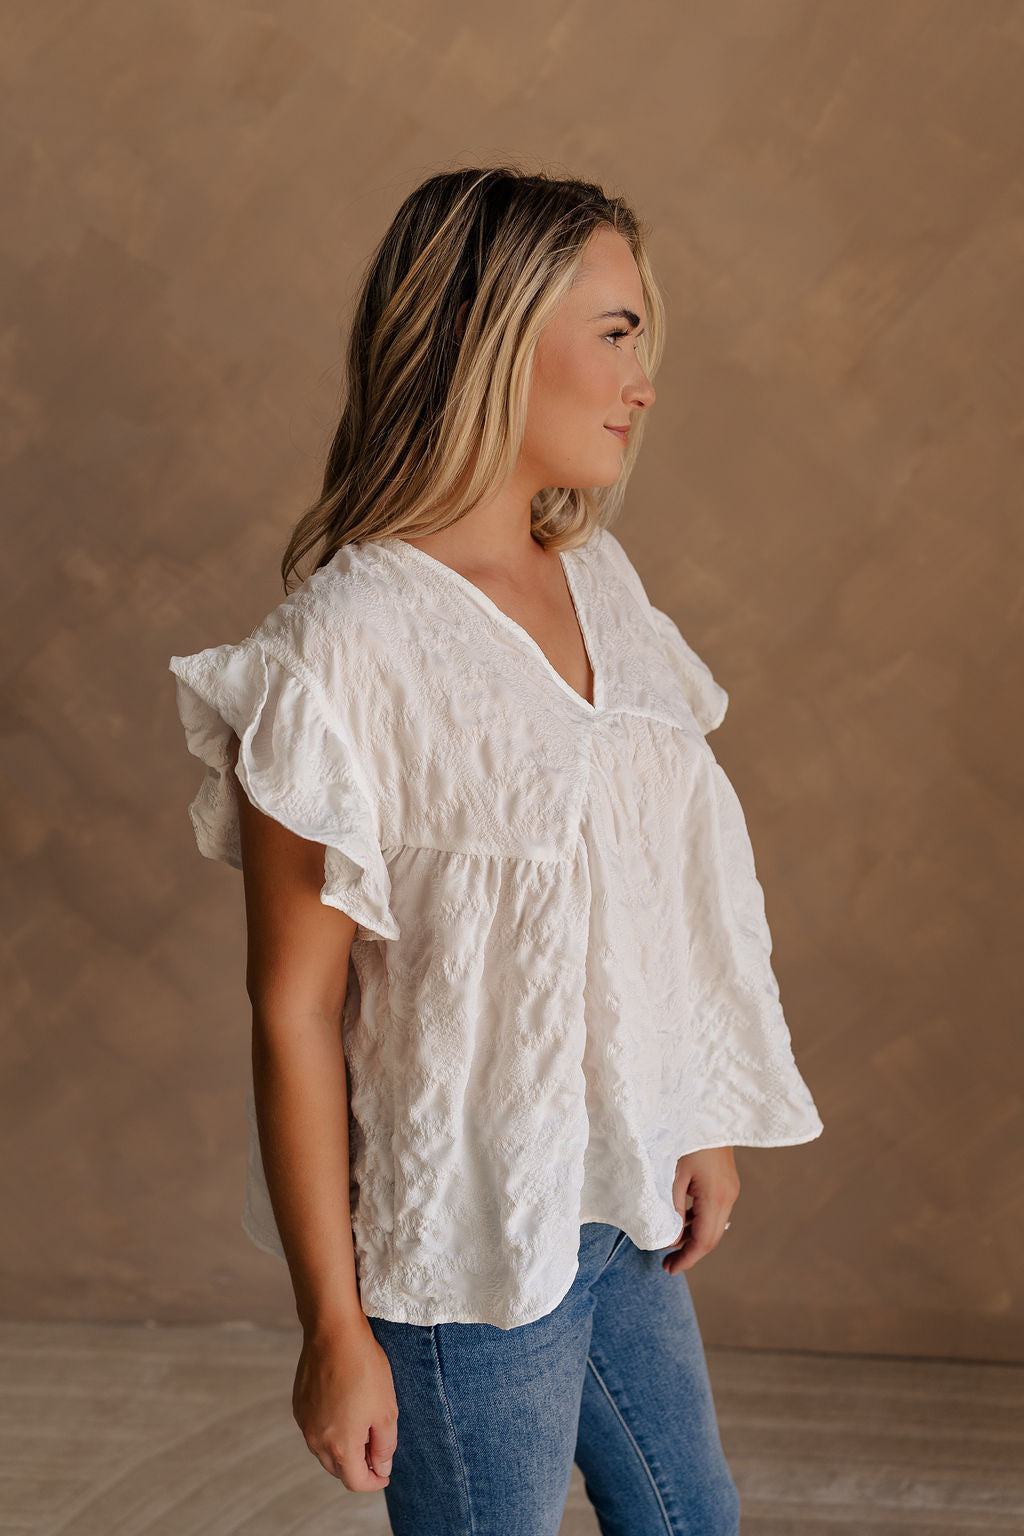 Upper body side view of female model wearing the Vivienne White Textured Top that has white textured fabric, short ruffled sleeves, and v neckline. worn with jeans.